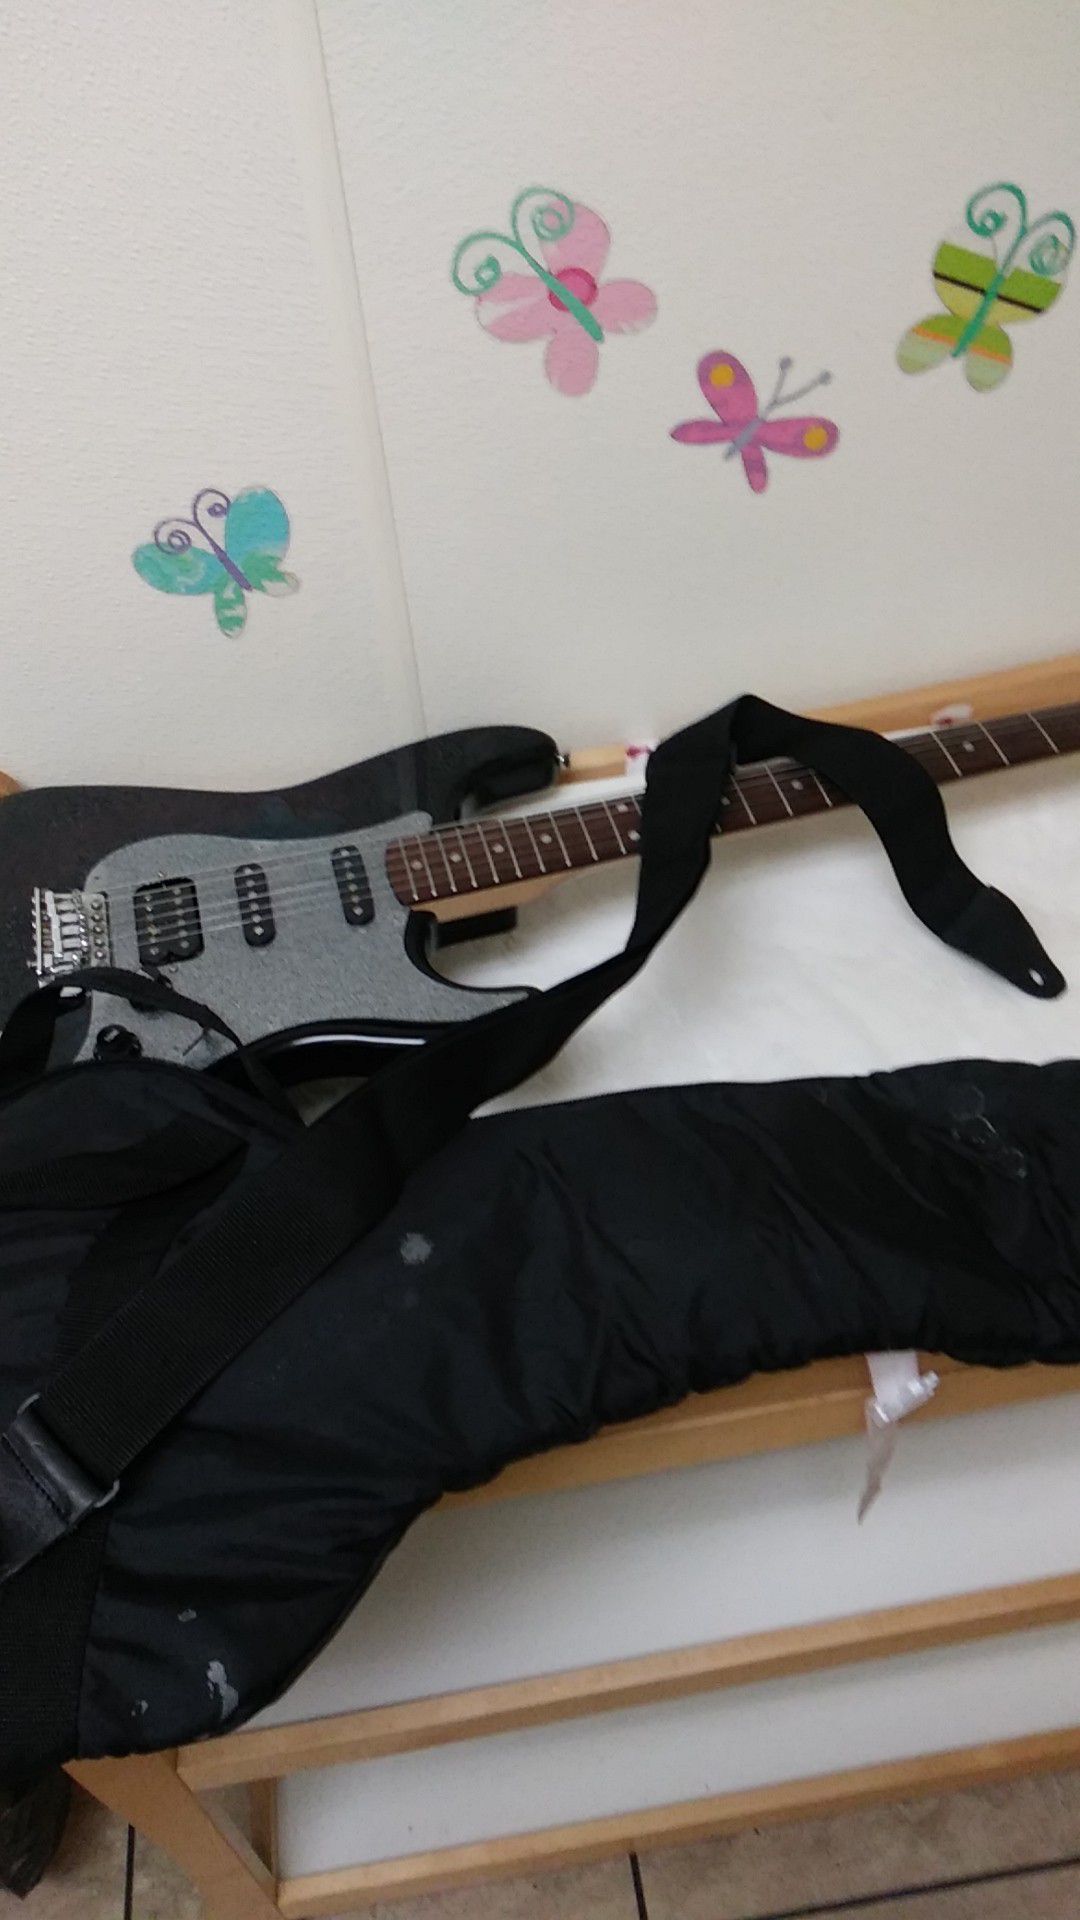 Fender Squire Strat. With Shoulder Strap and Ibanez Case ( Trade For An Acoustic. Or OBO)